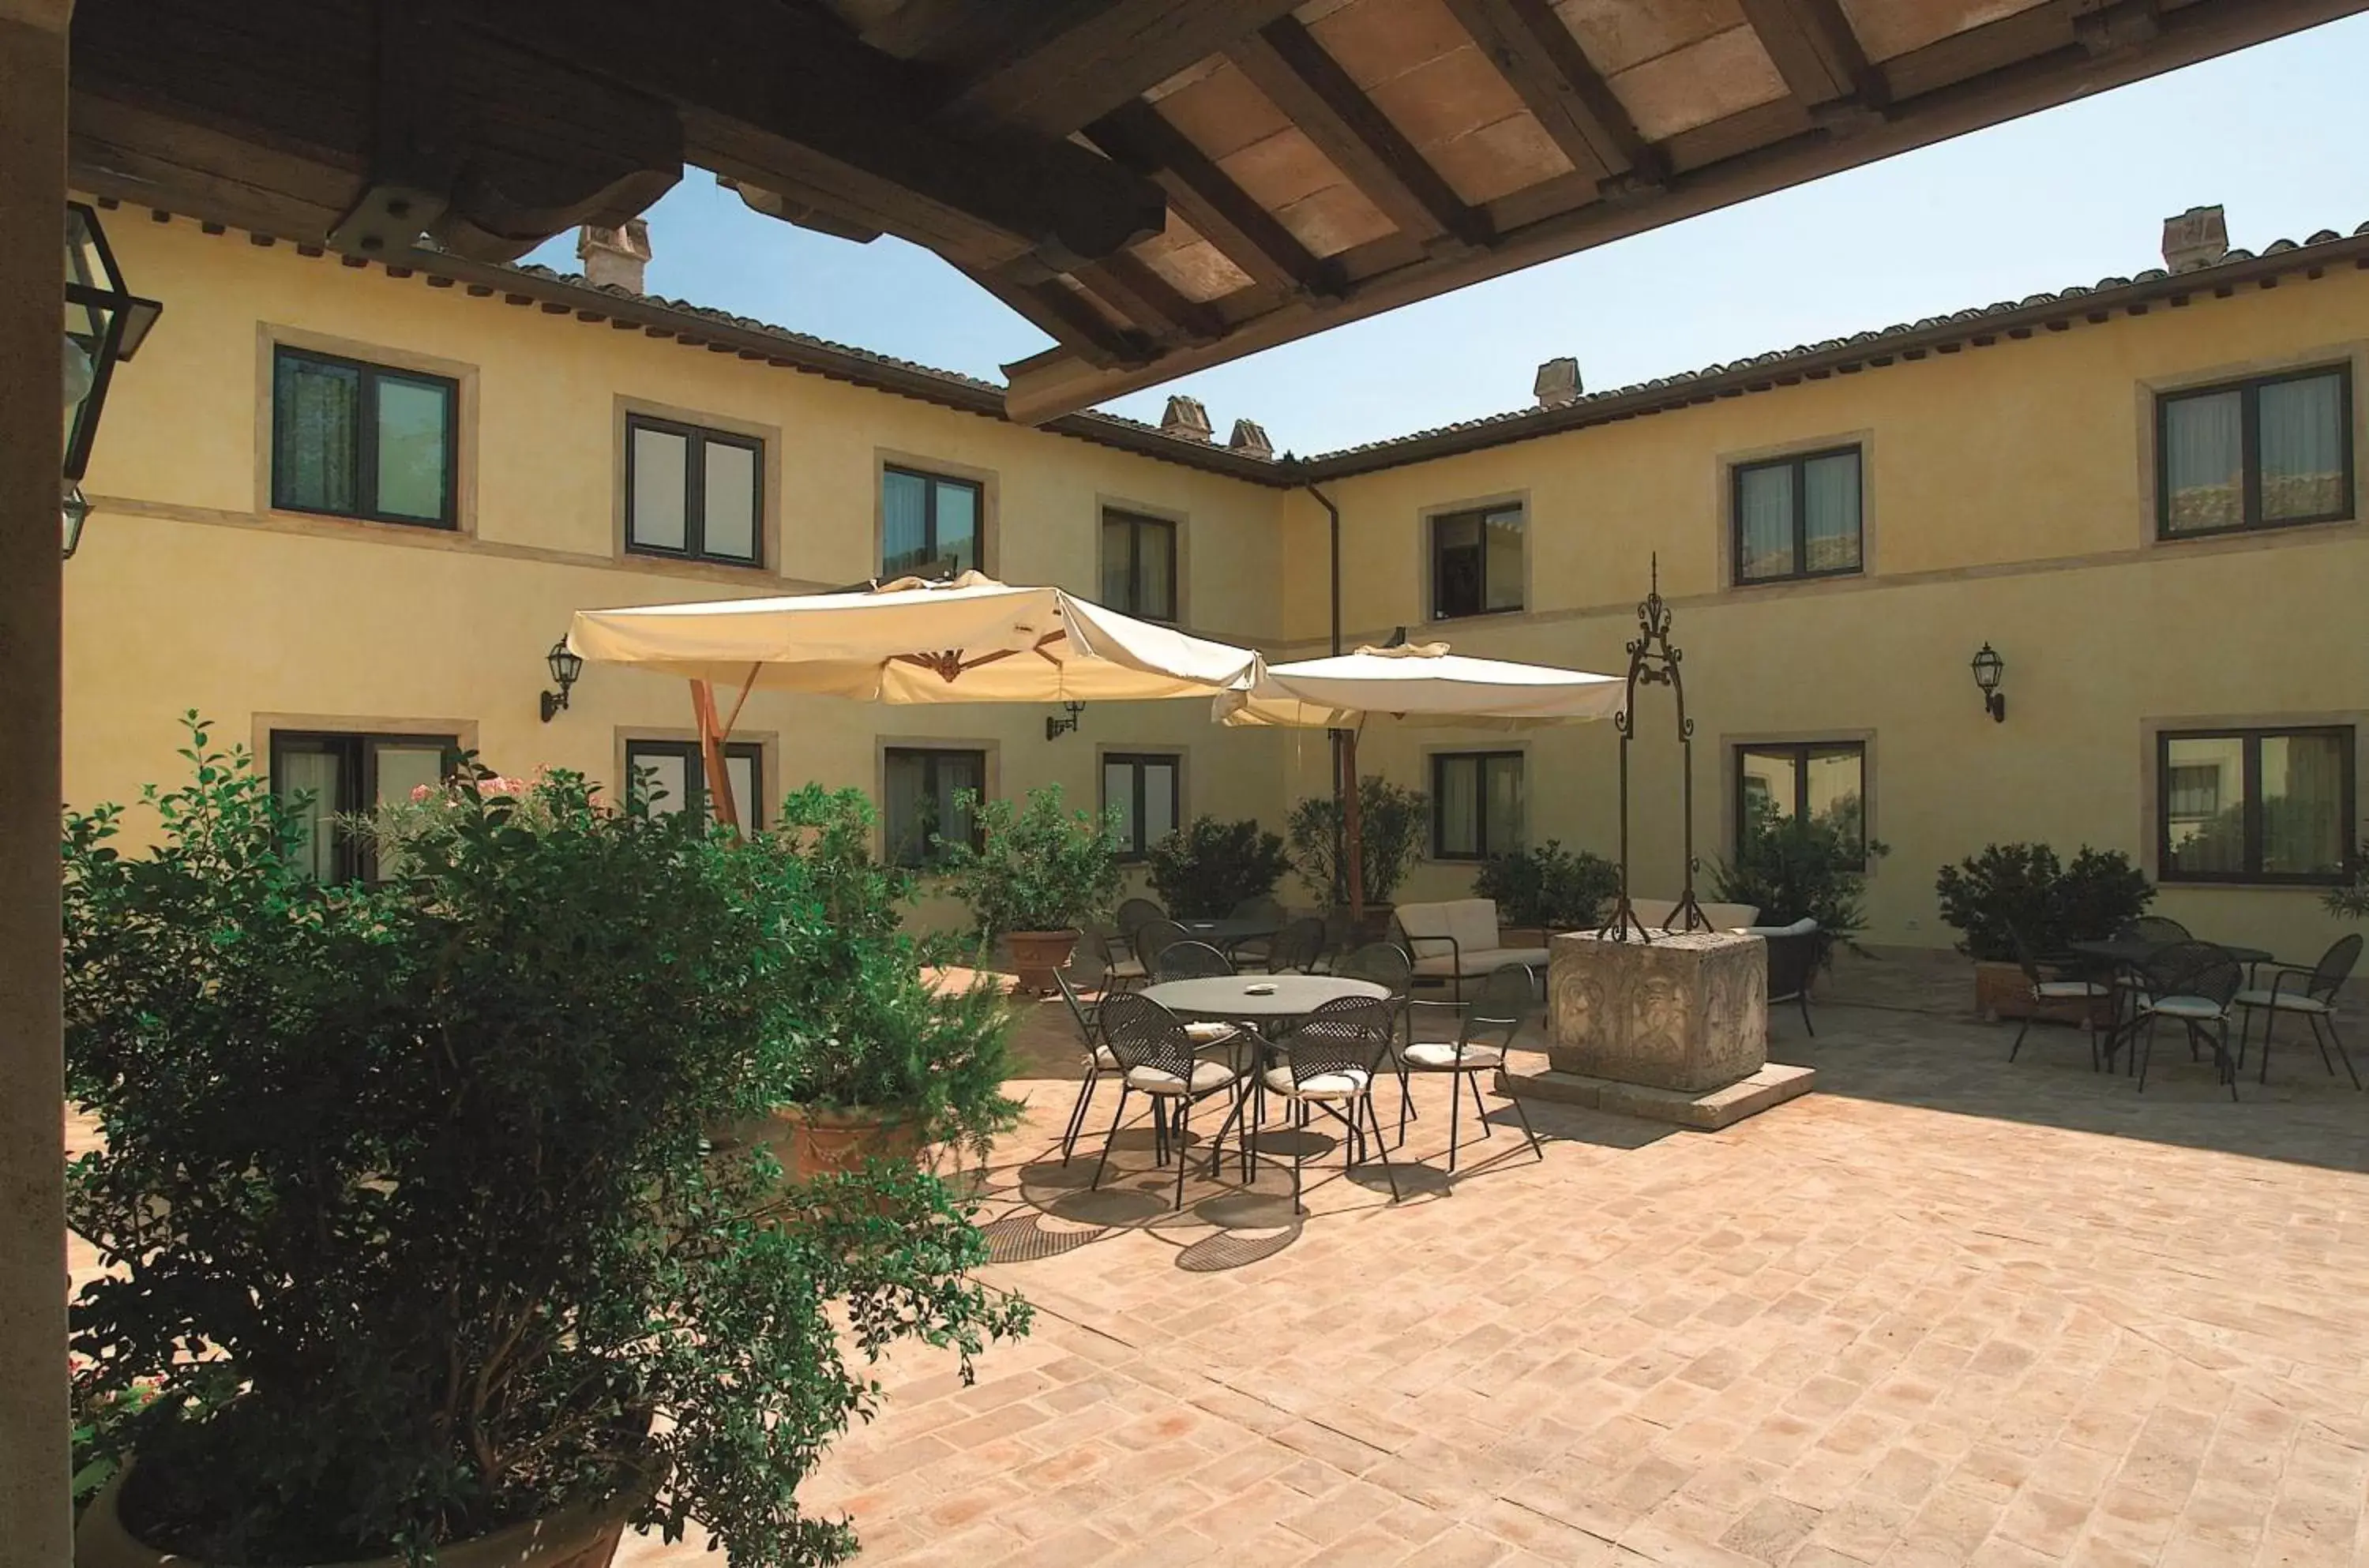 Property building in Relais dell'Olmo